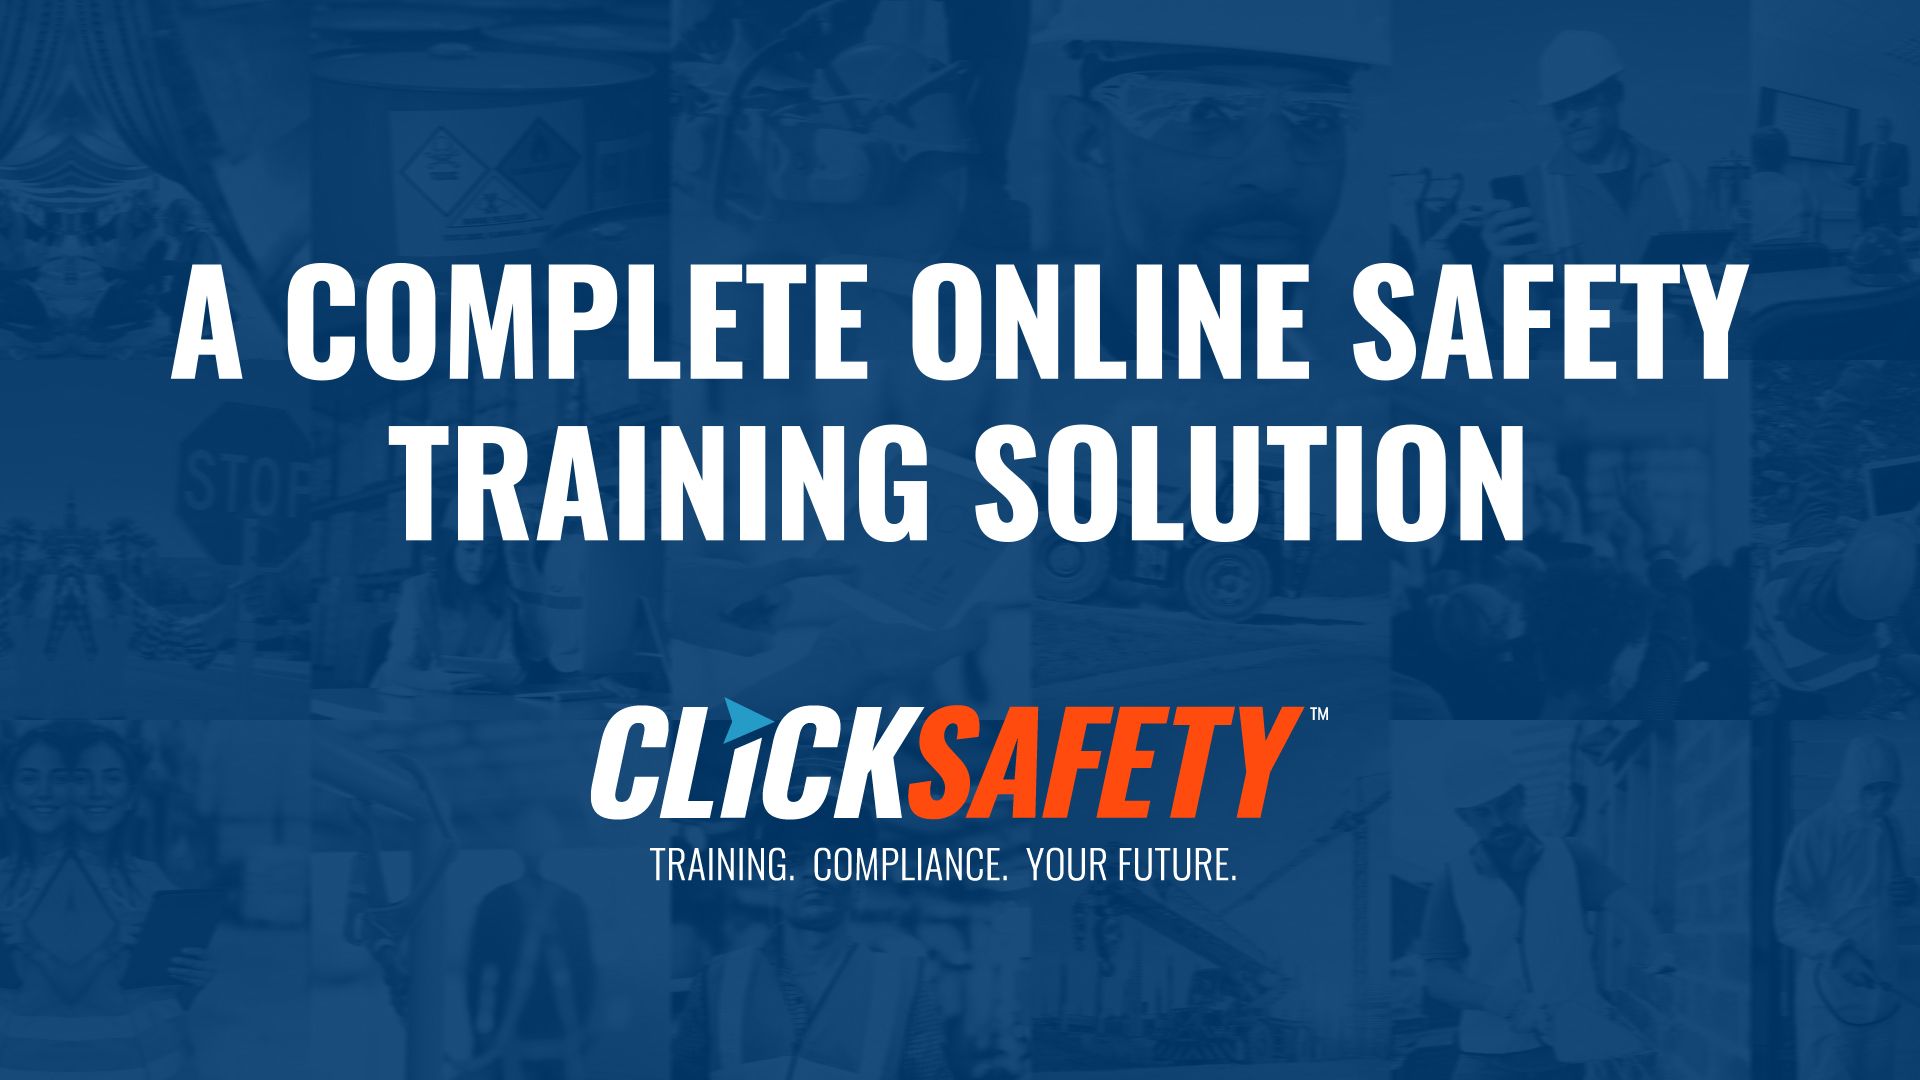 ClickSafety Overview